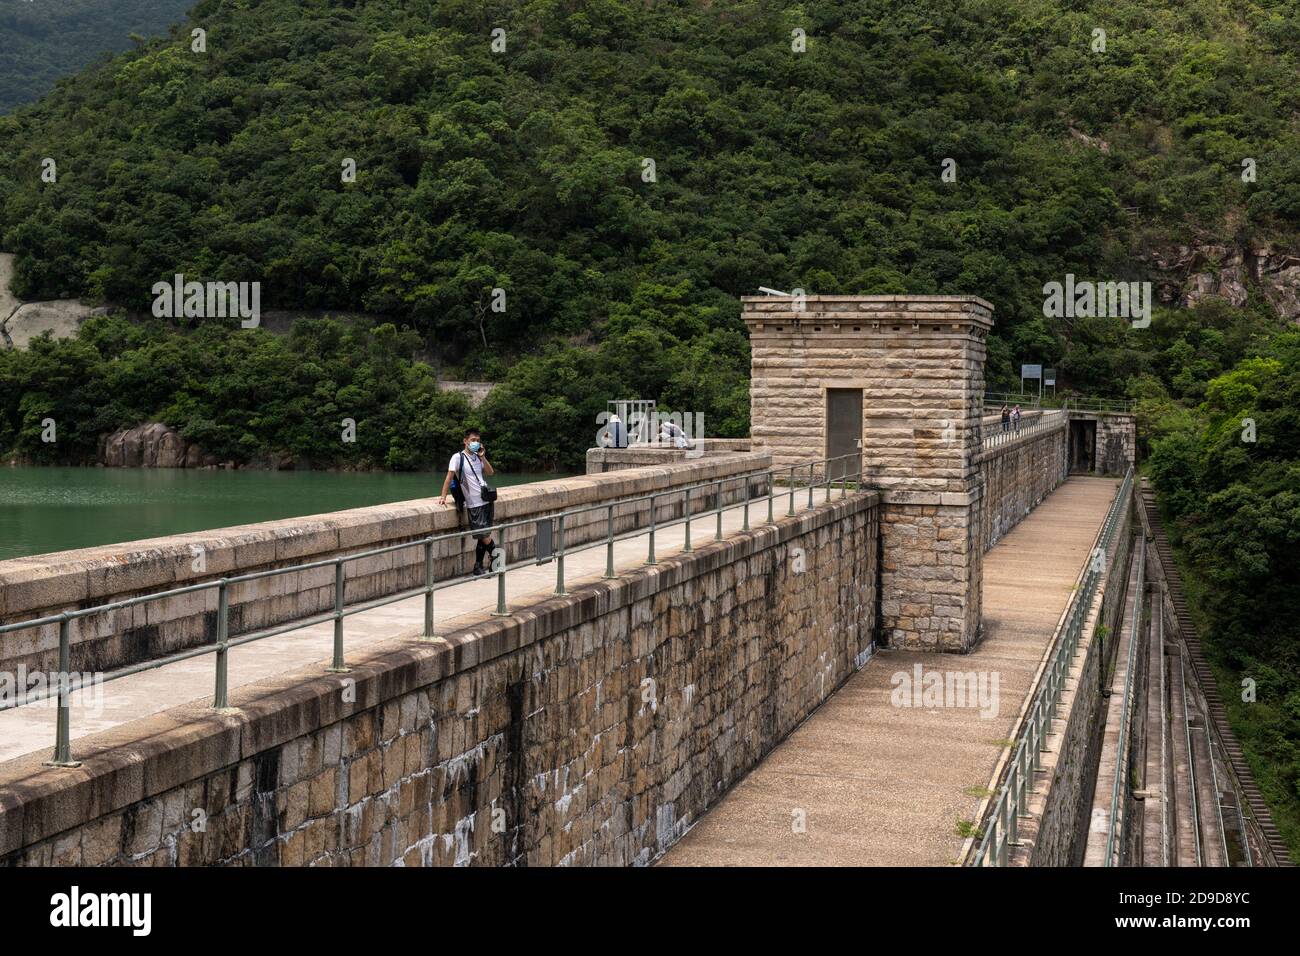 Hong Kong,China:23 Aug,2020.  Tai Tam Upper Reservoir bridge and valve house on the dam.Hiking in Hong Kong is a very popular pastime fueled more by w Stock Photo